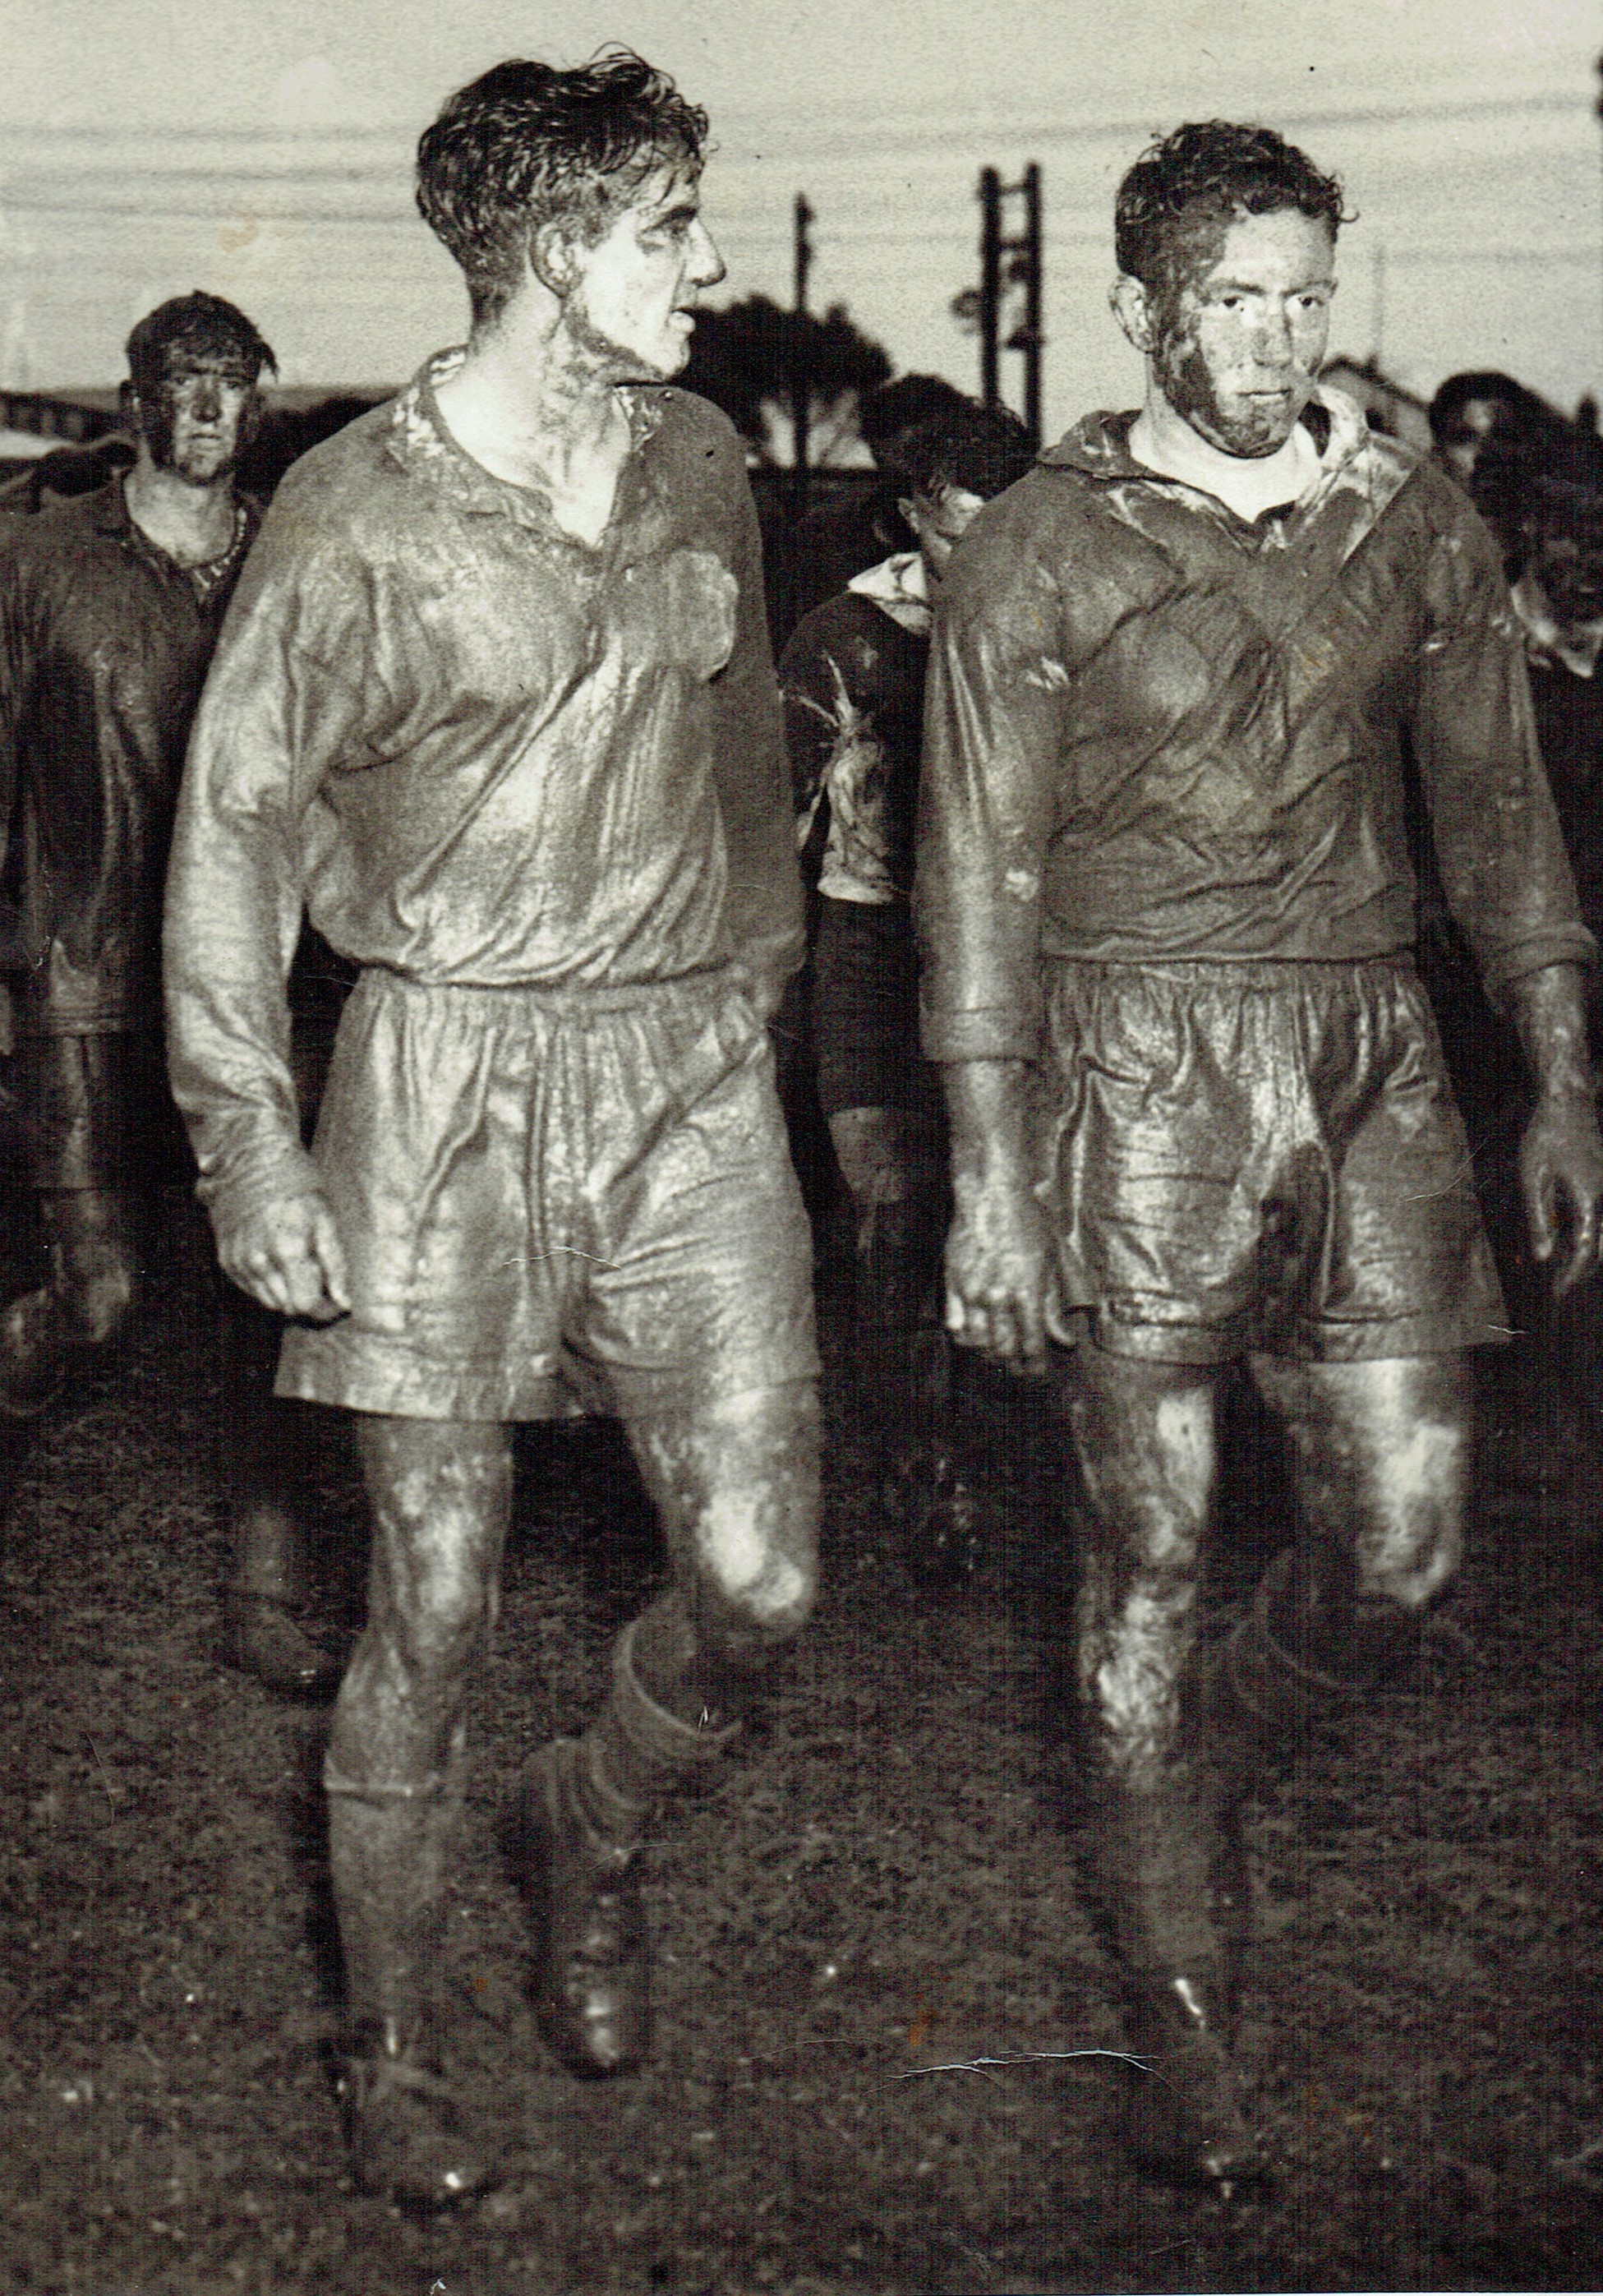 Charlie Smith and unknown Cessnock player 1953.